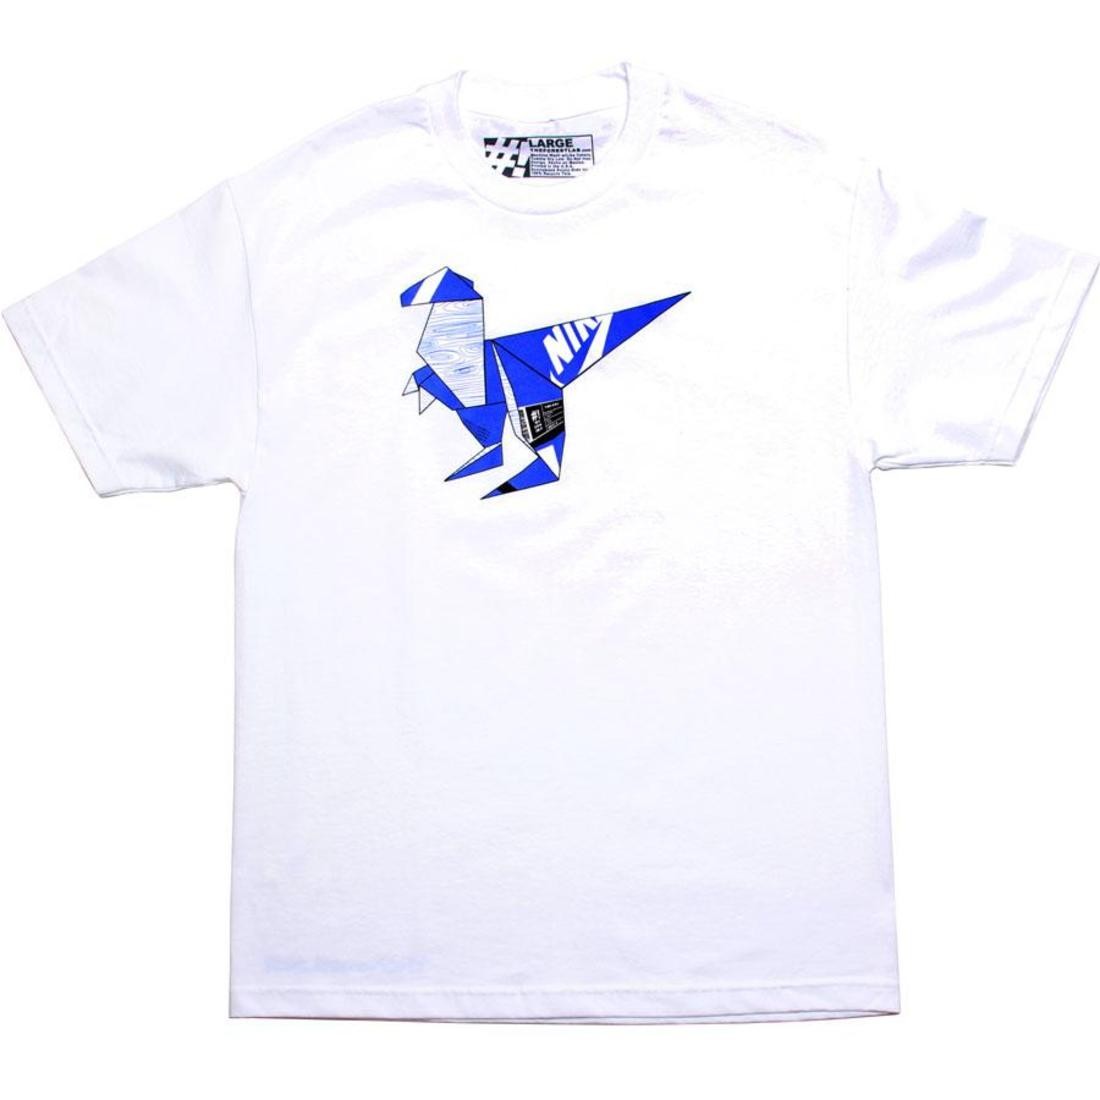 The Forest Lab T-Rex Tee - Blue SB Box (white)